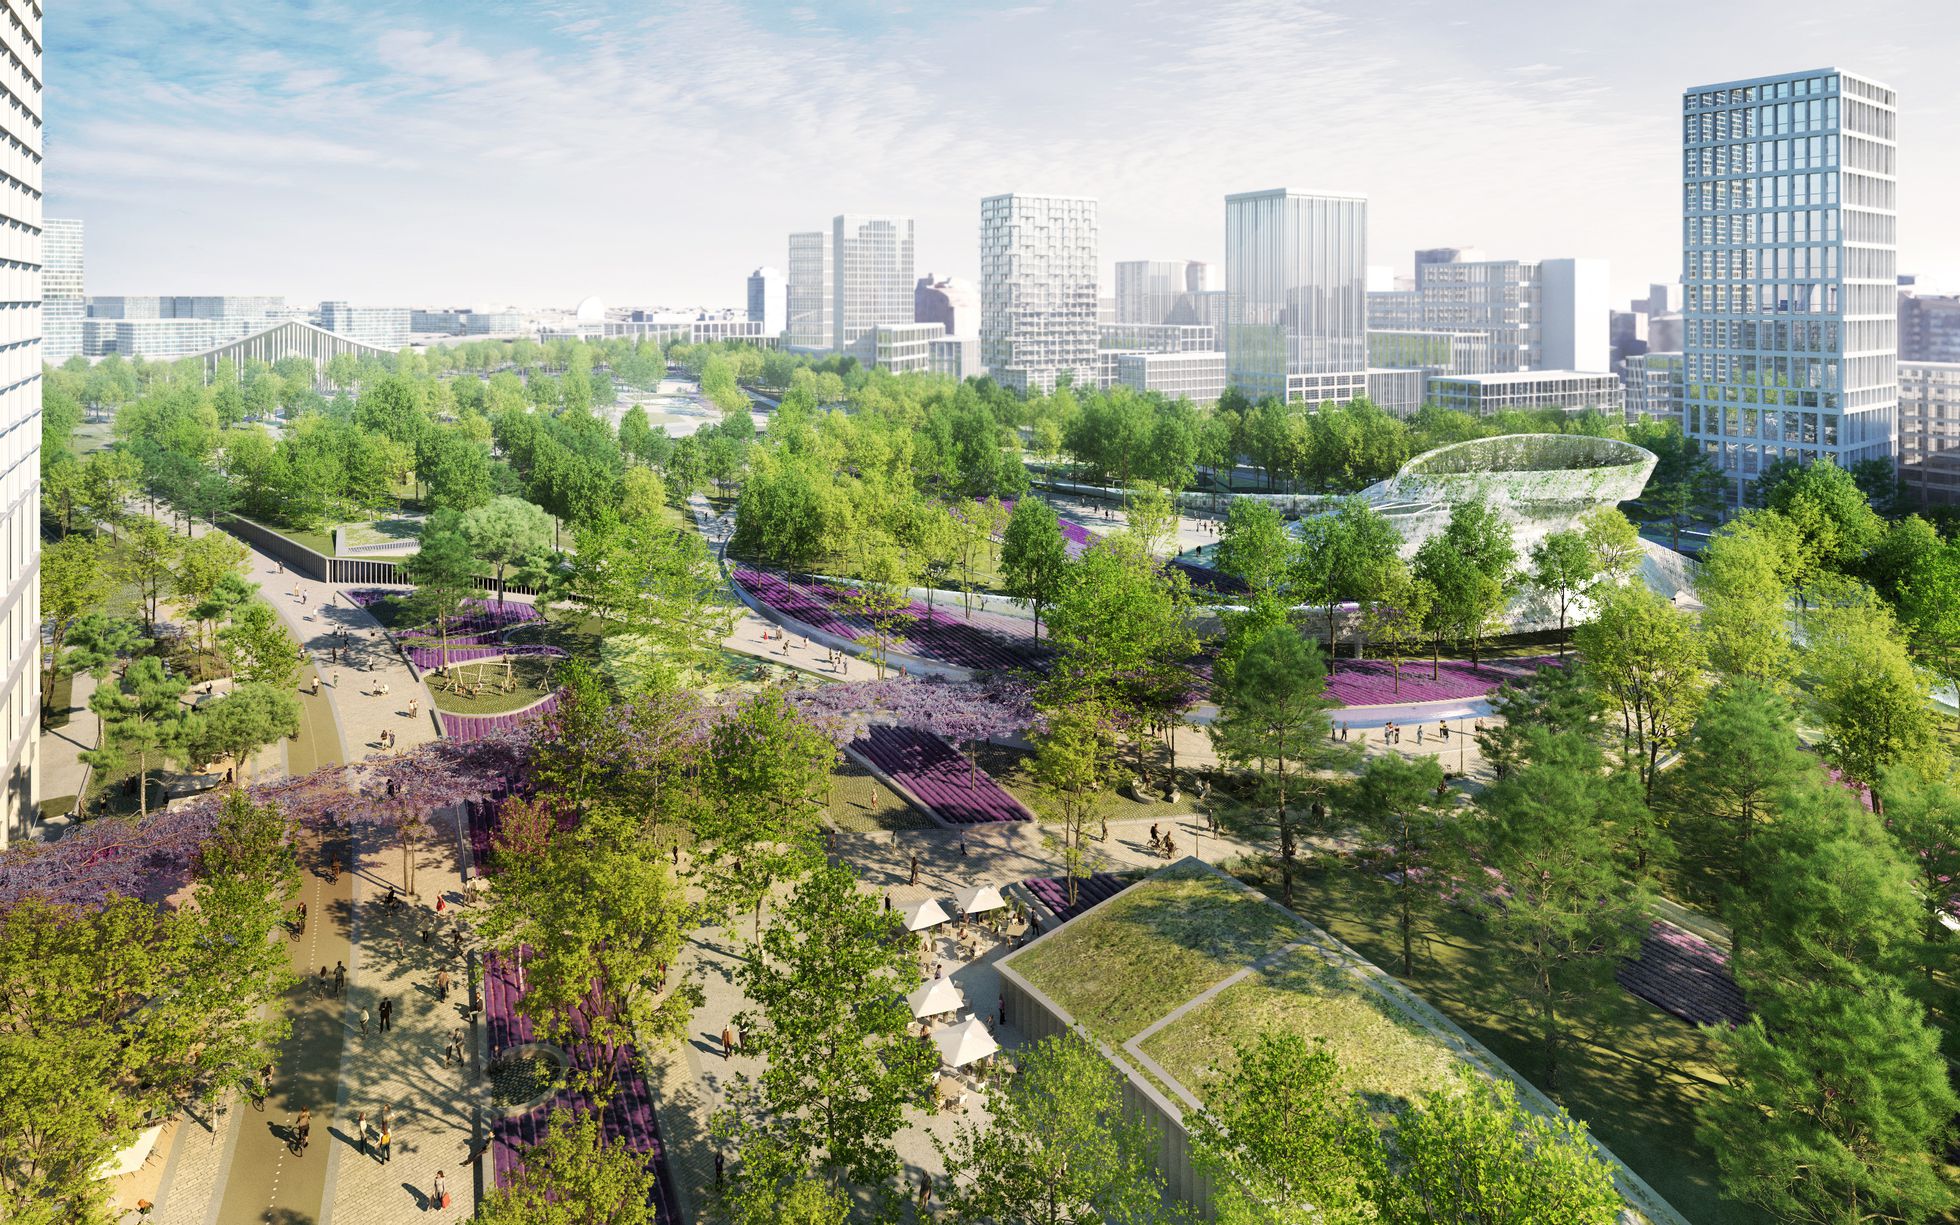 Madrid aims to transform mobility with huge urban forest - Cities Today